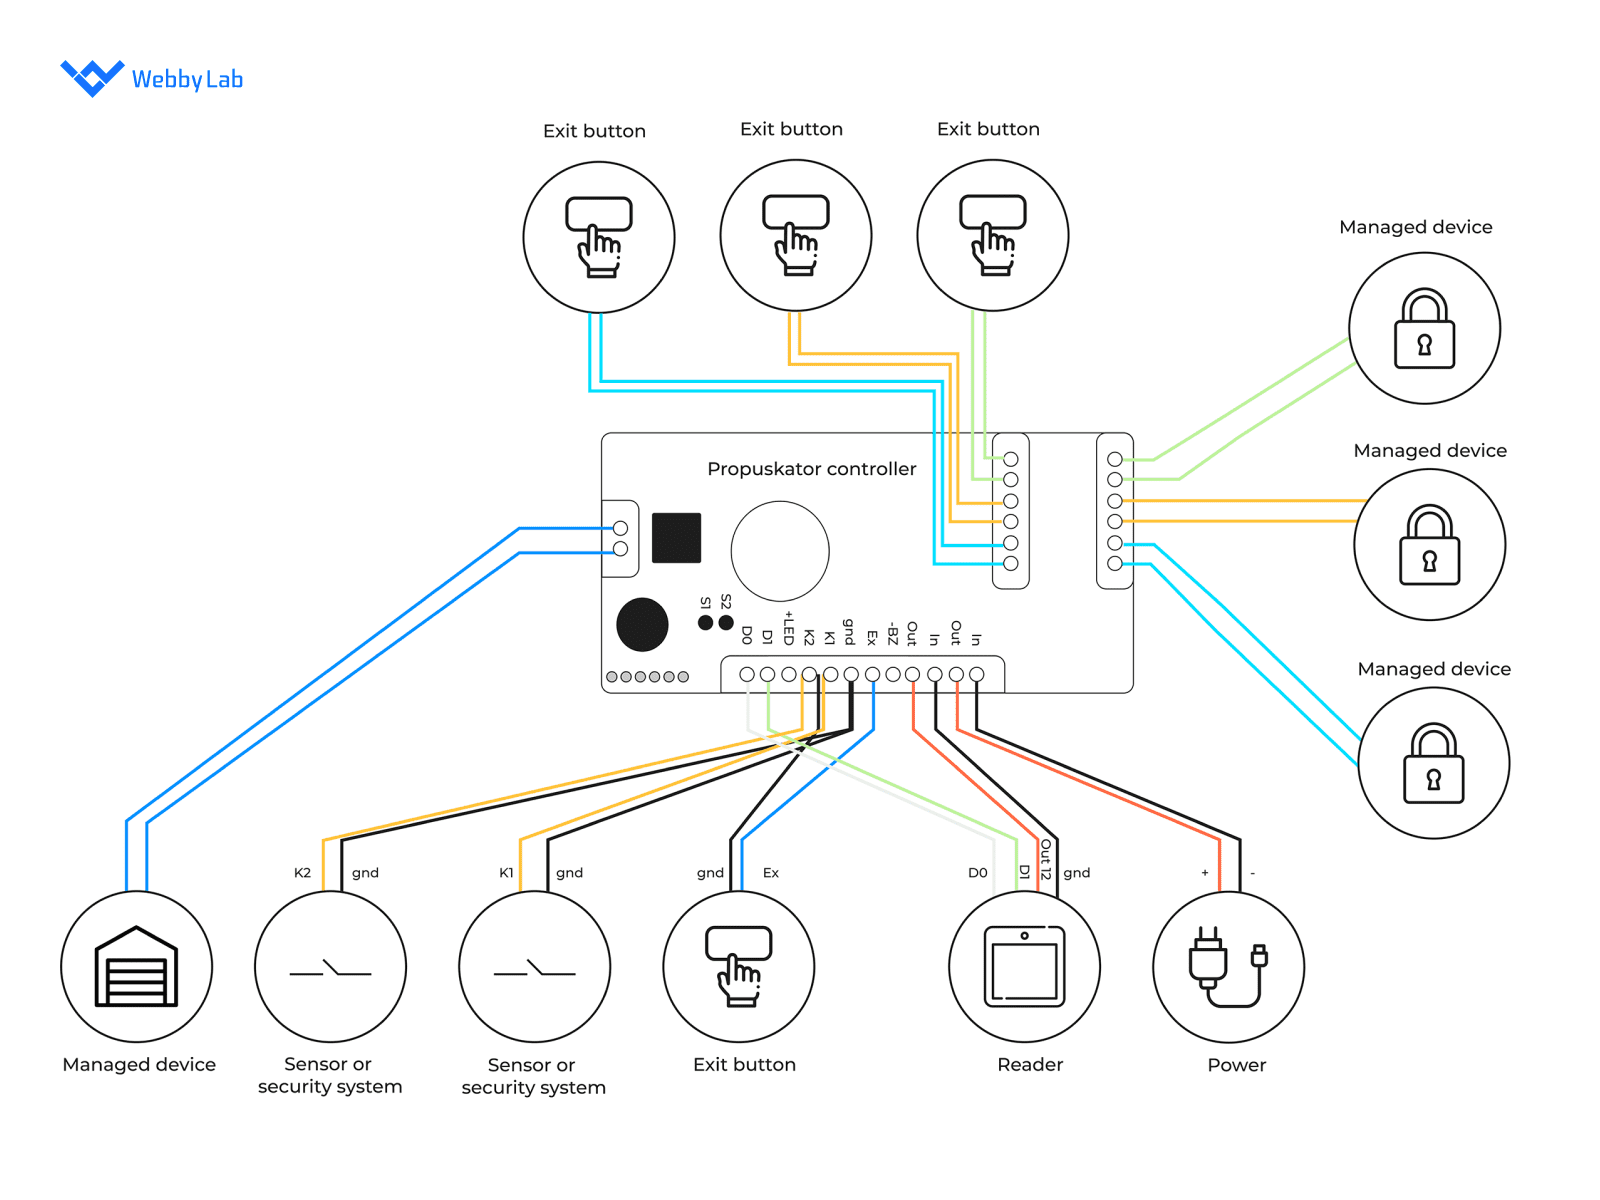 The scheme of connecting the managed devices to the controller.